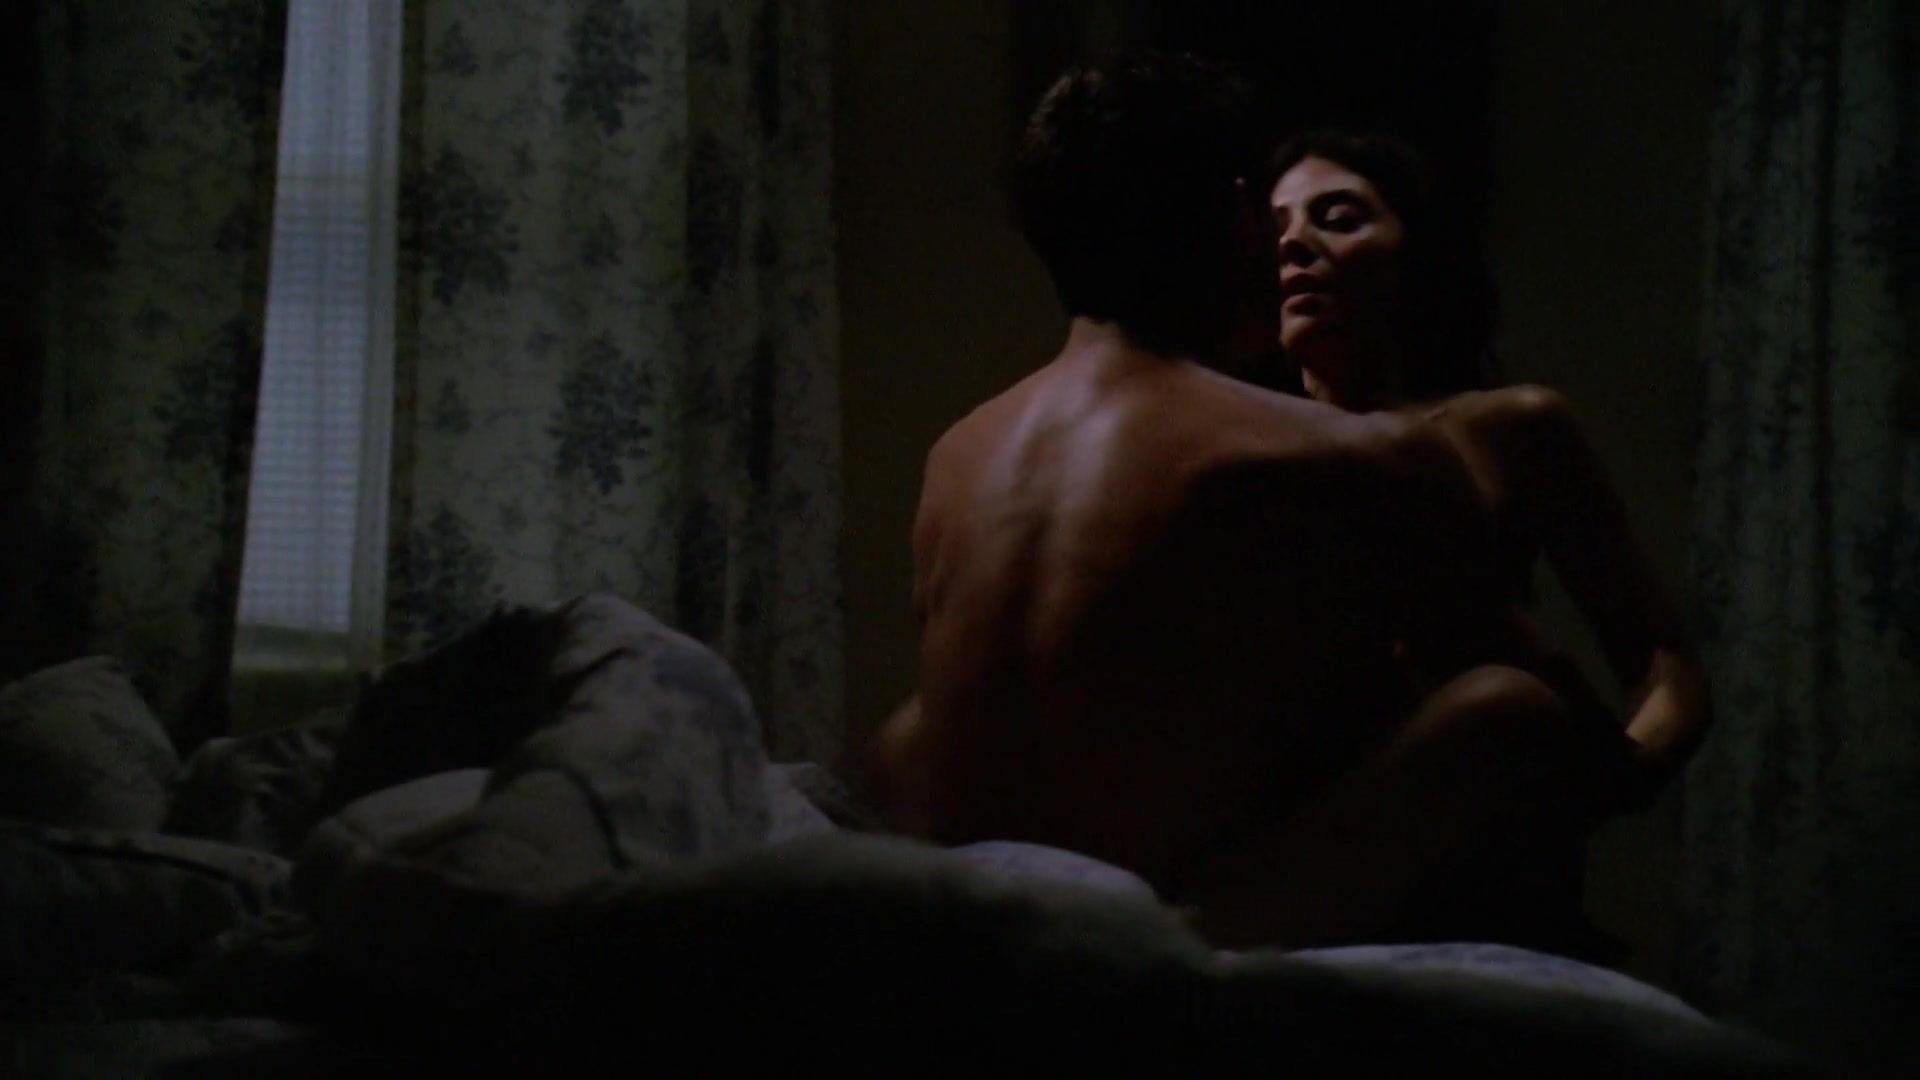 Super Hot Porn Sexy Callie Thorne naked -The Wire s02e06 (2003) Toy - 2